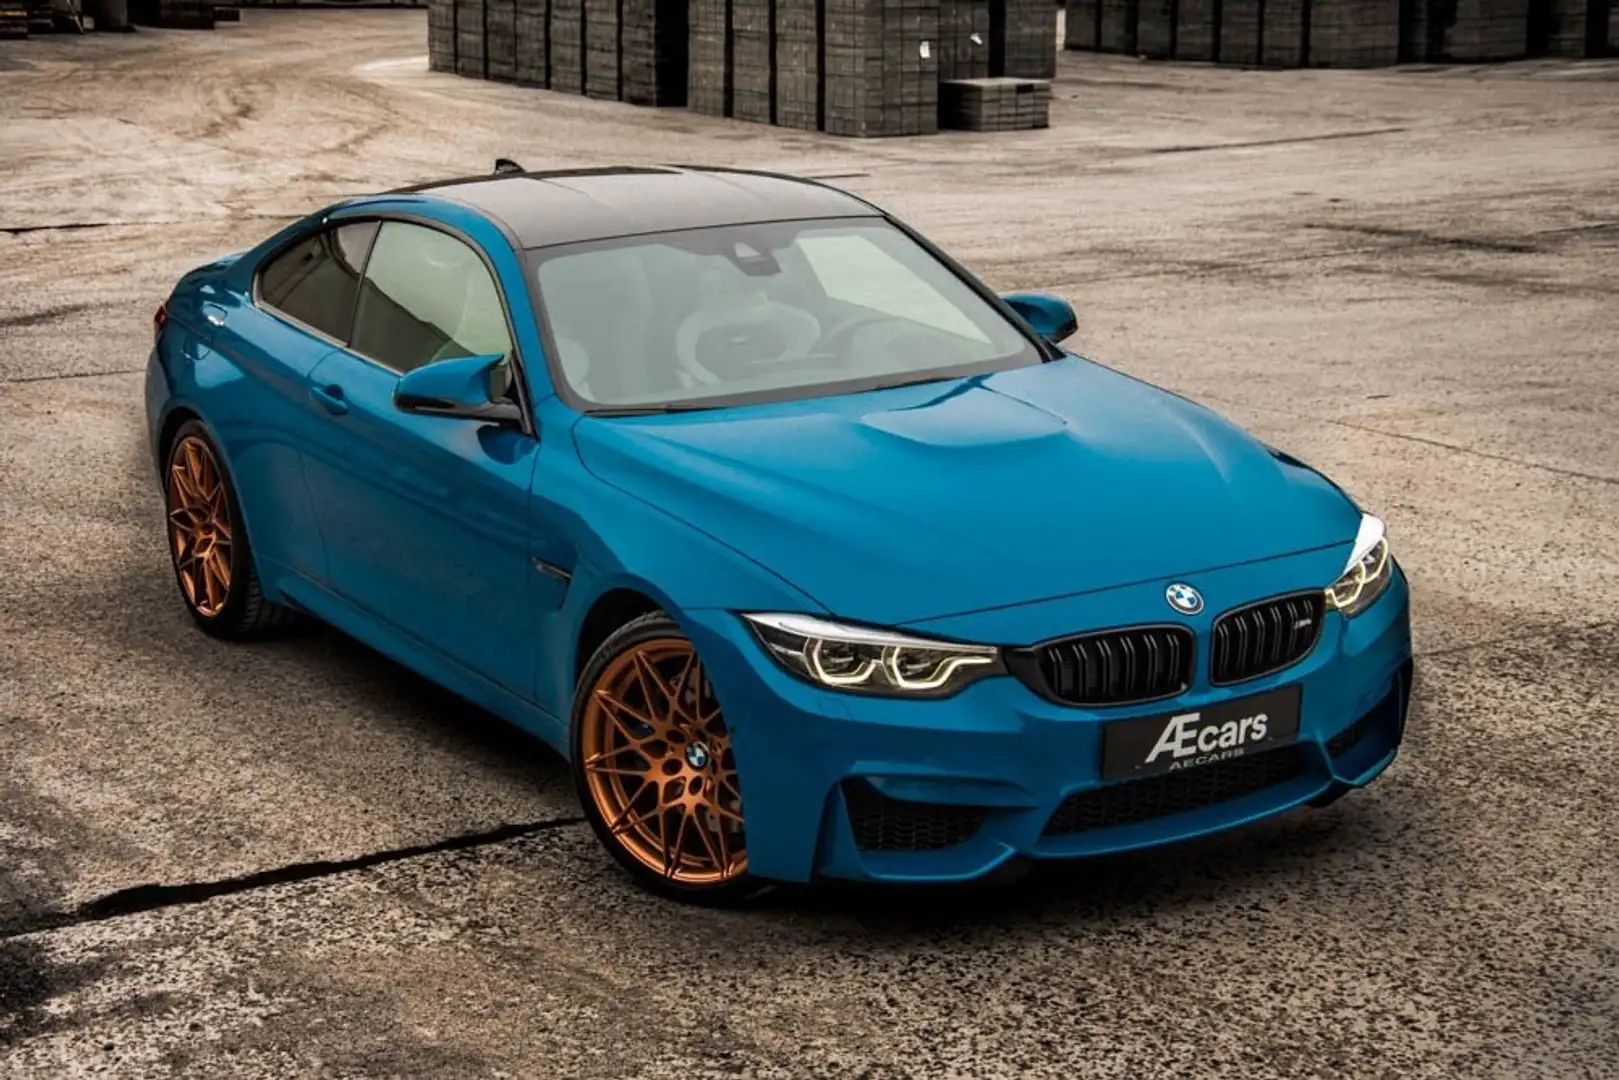 BMW M4 *** COMPETITION HERITAGE / LIMITED 1 OF 750 *** Синій - 2